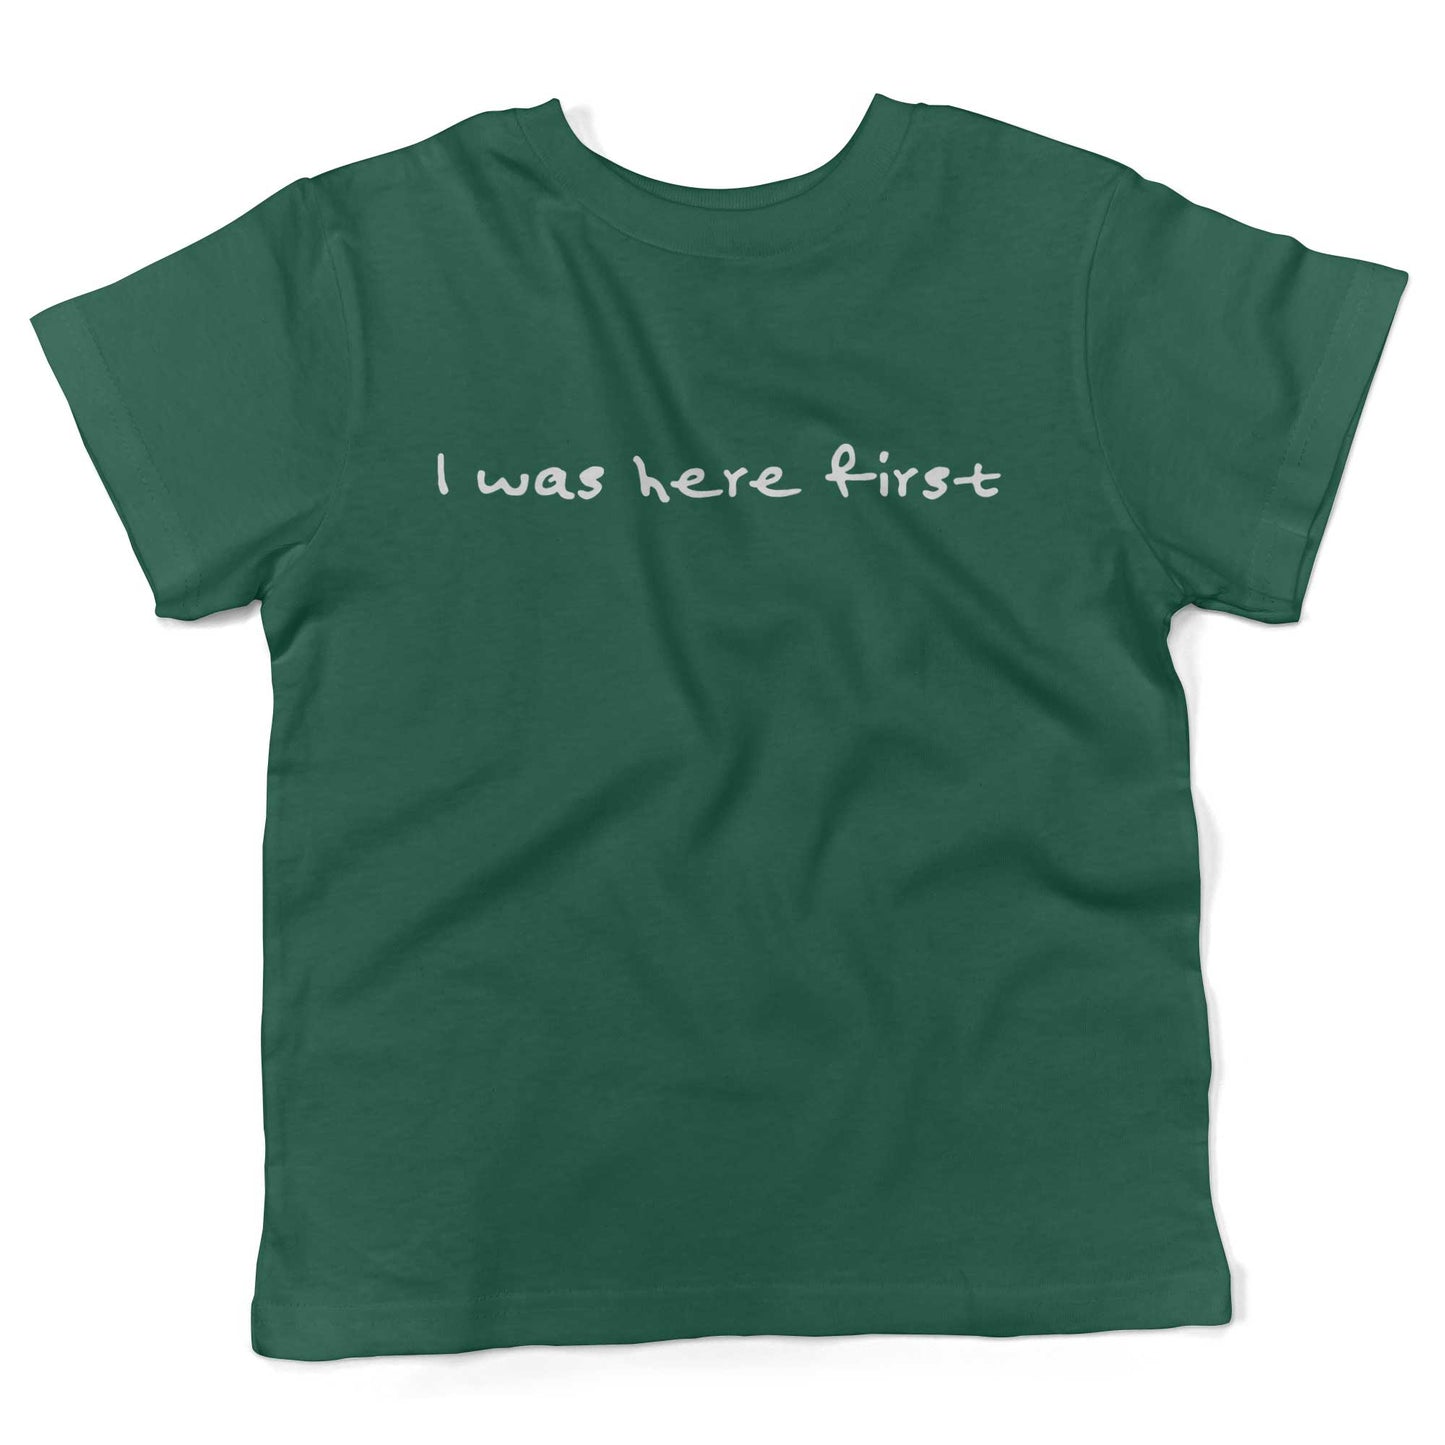 I Was Here First Toddler Shirt-Kelly Green-2T